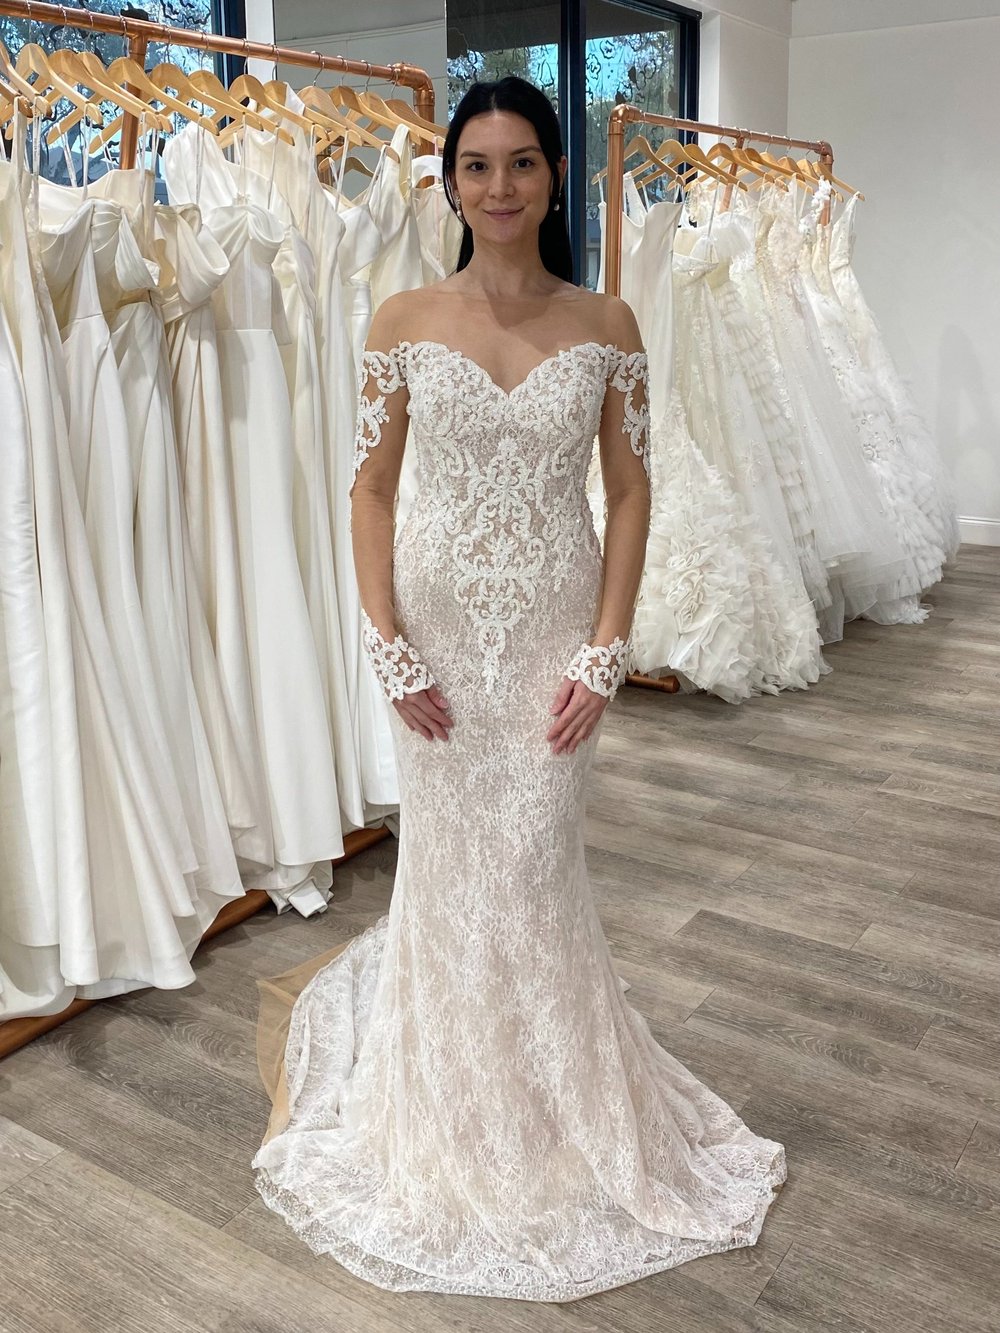 Off the Rack Wedding Dresses Orlando, Sample Sale Gowns